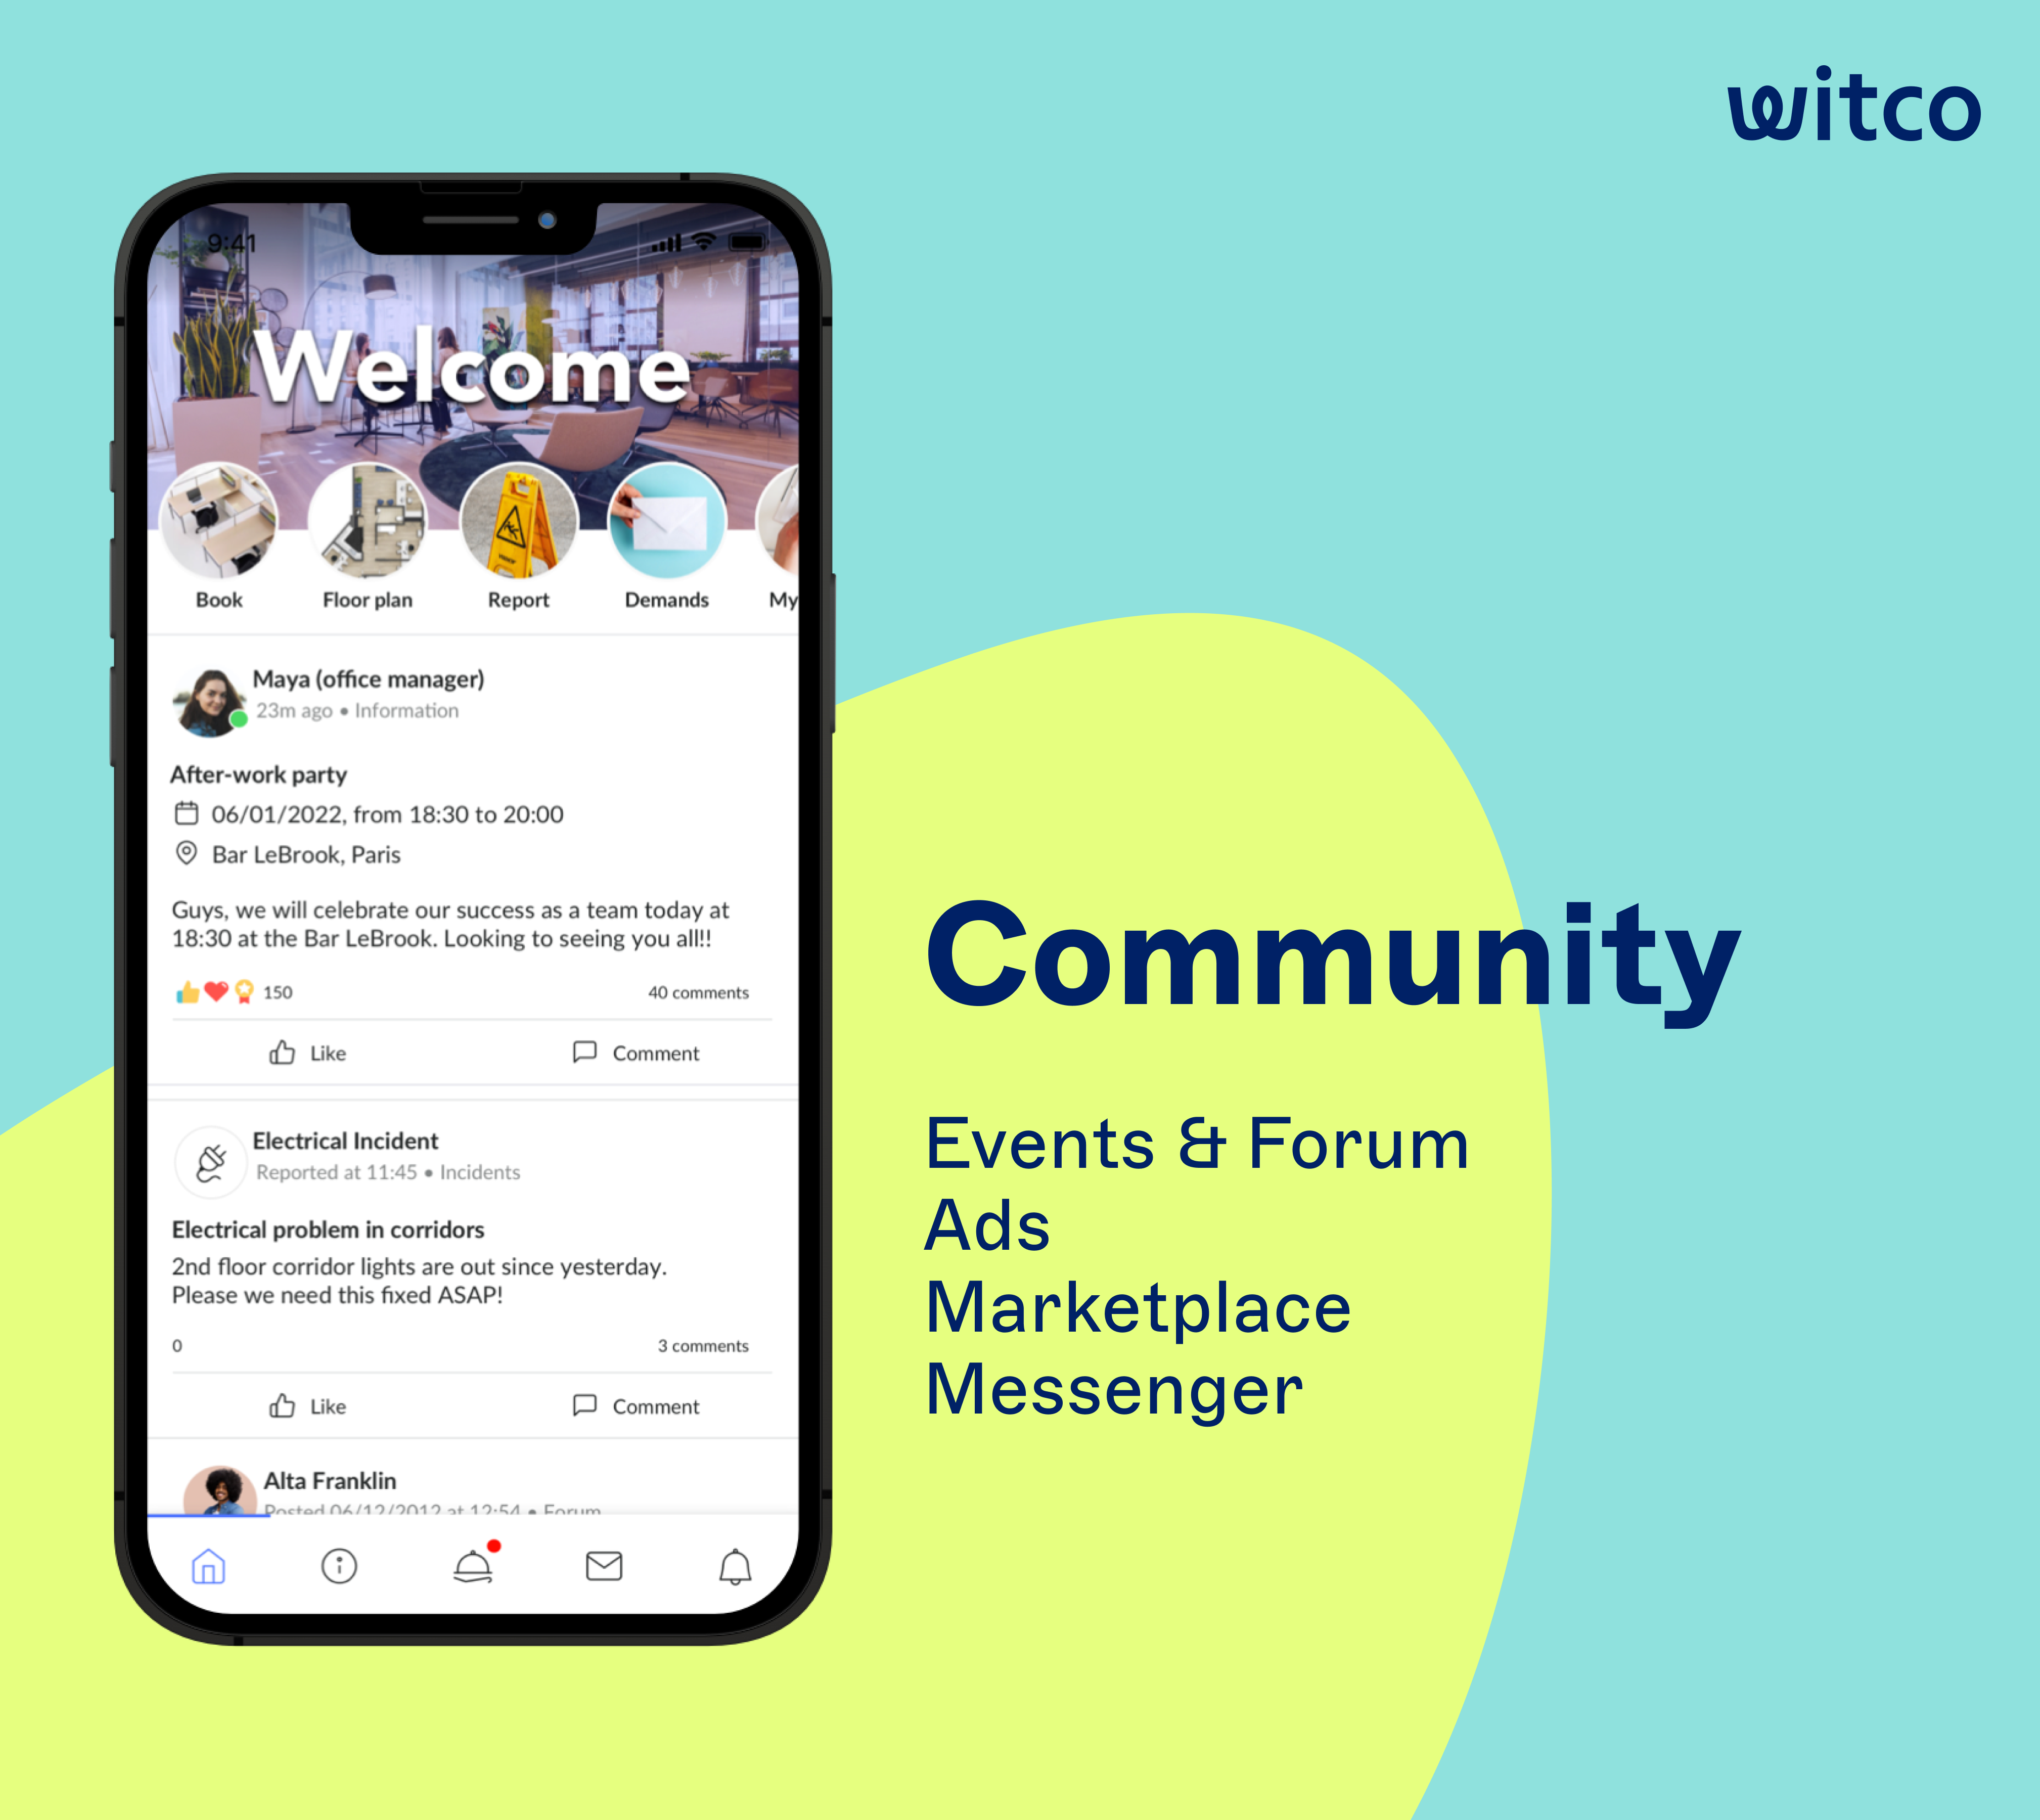 The toolbox for strengthening social connections at the office: events & forum, classified ads, marketplace, messenger.